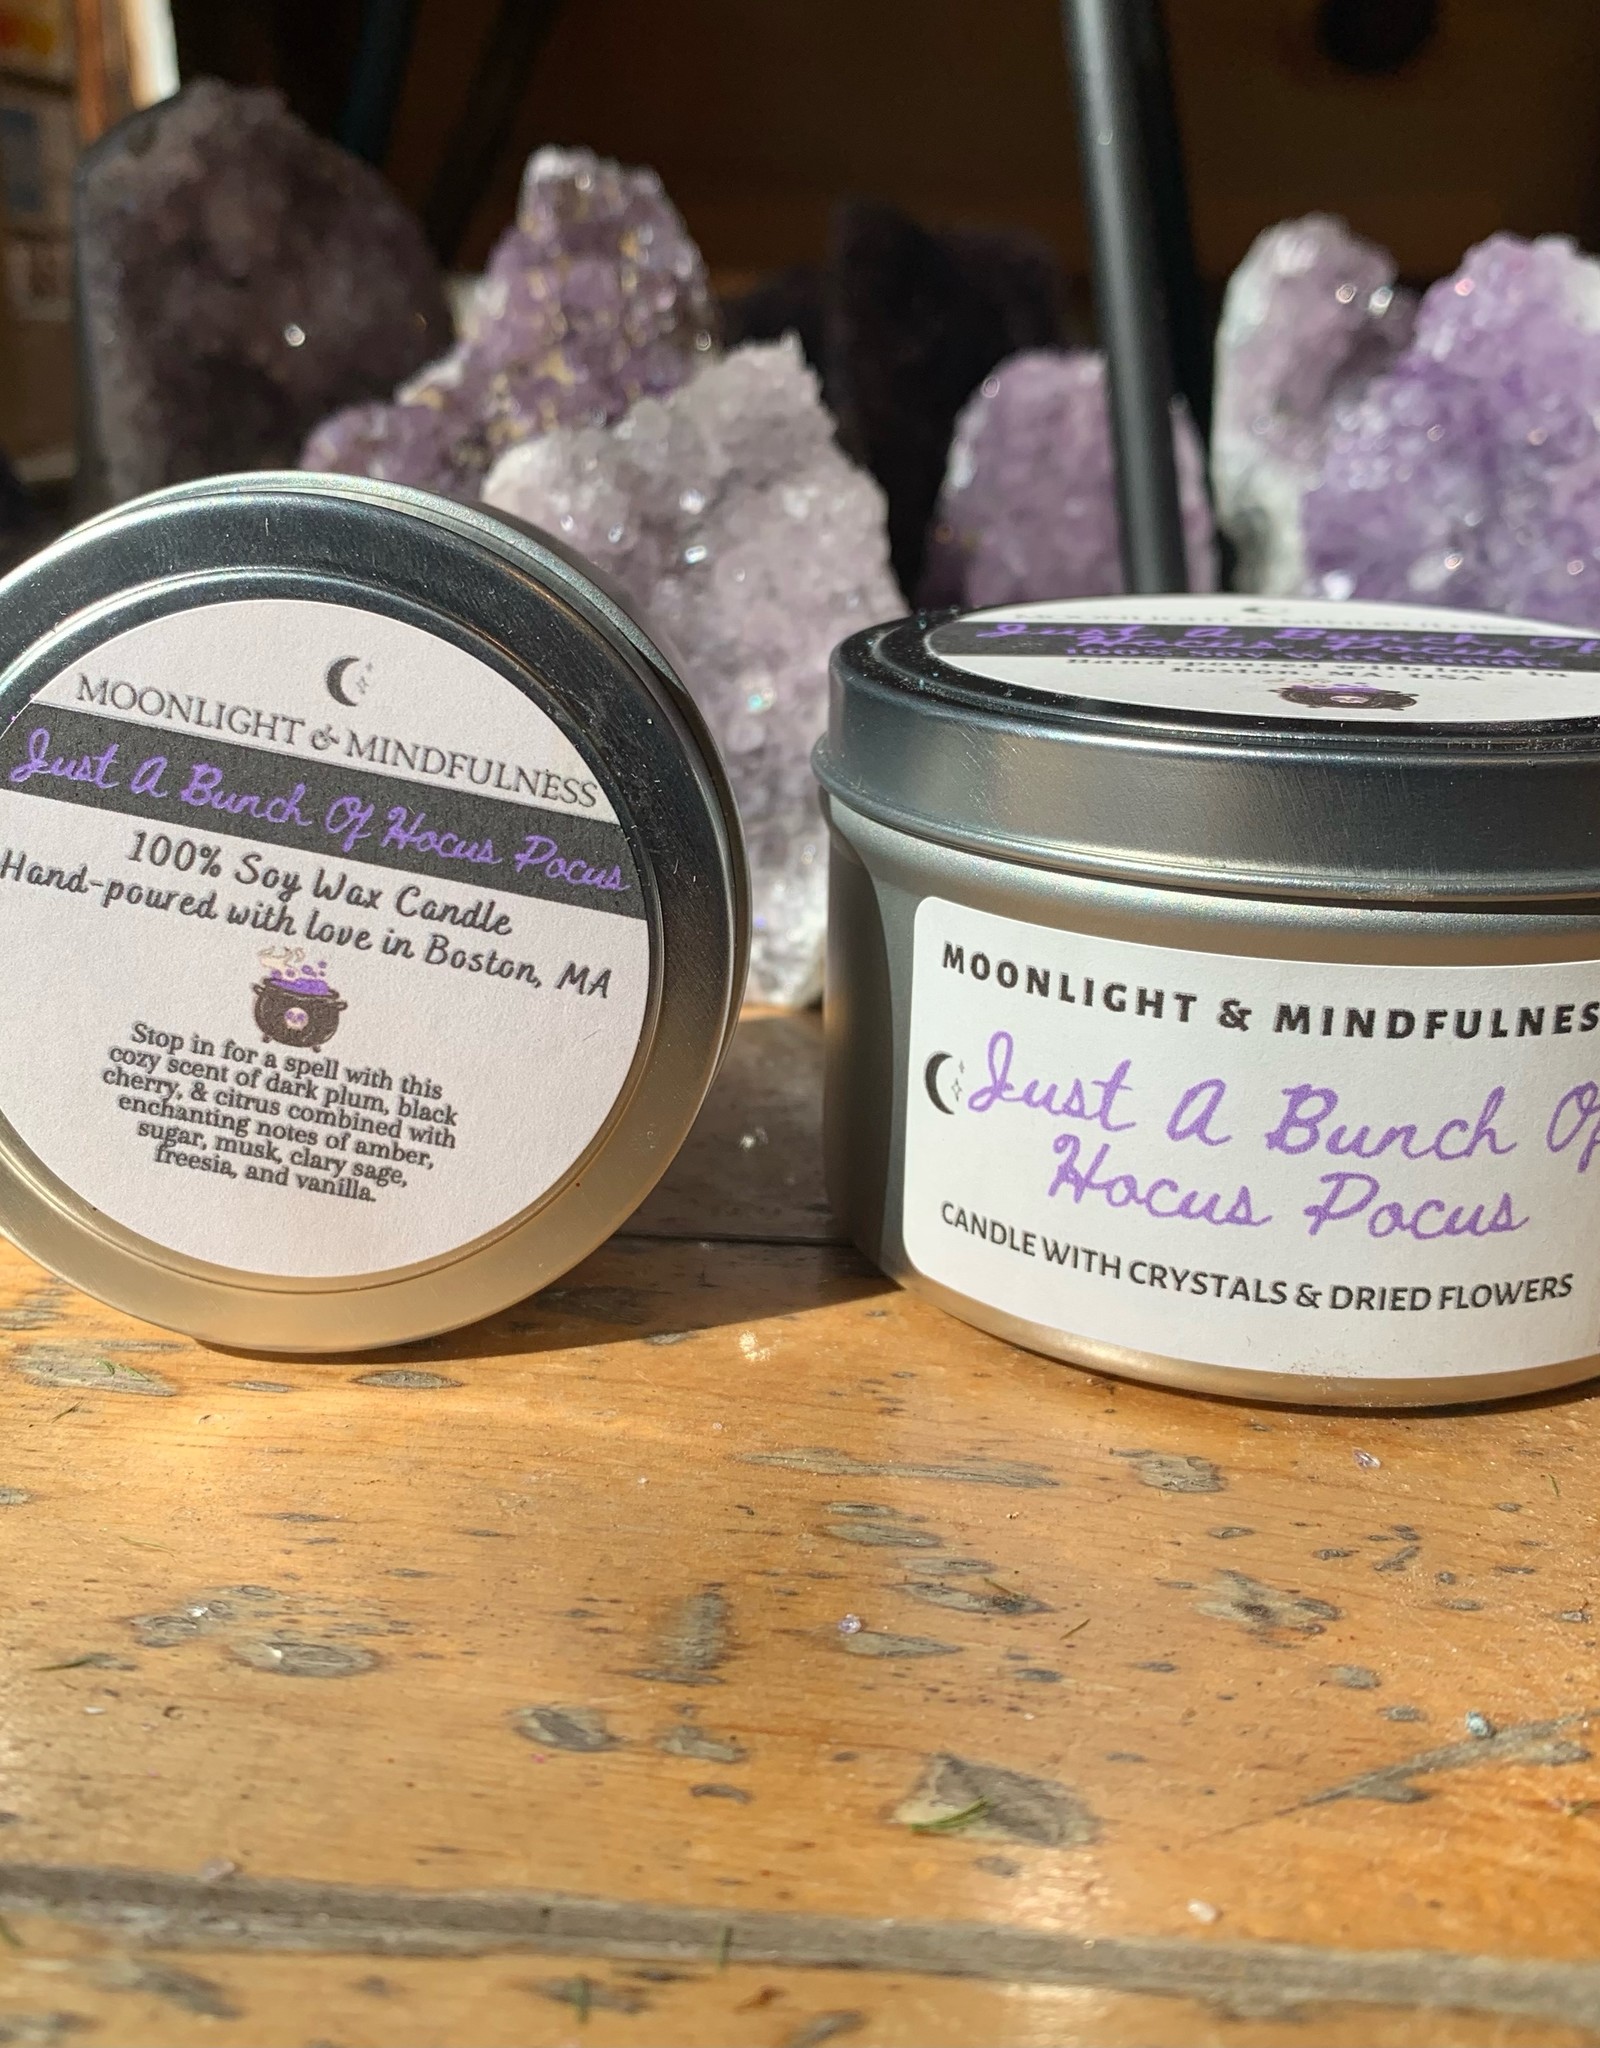 Moonlight and Minfulness Just a Bunch of Hocus Pocus 8oz Candle